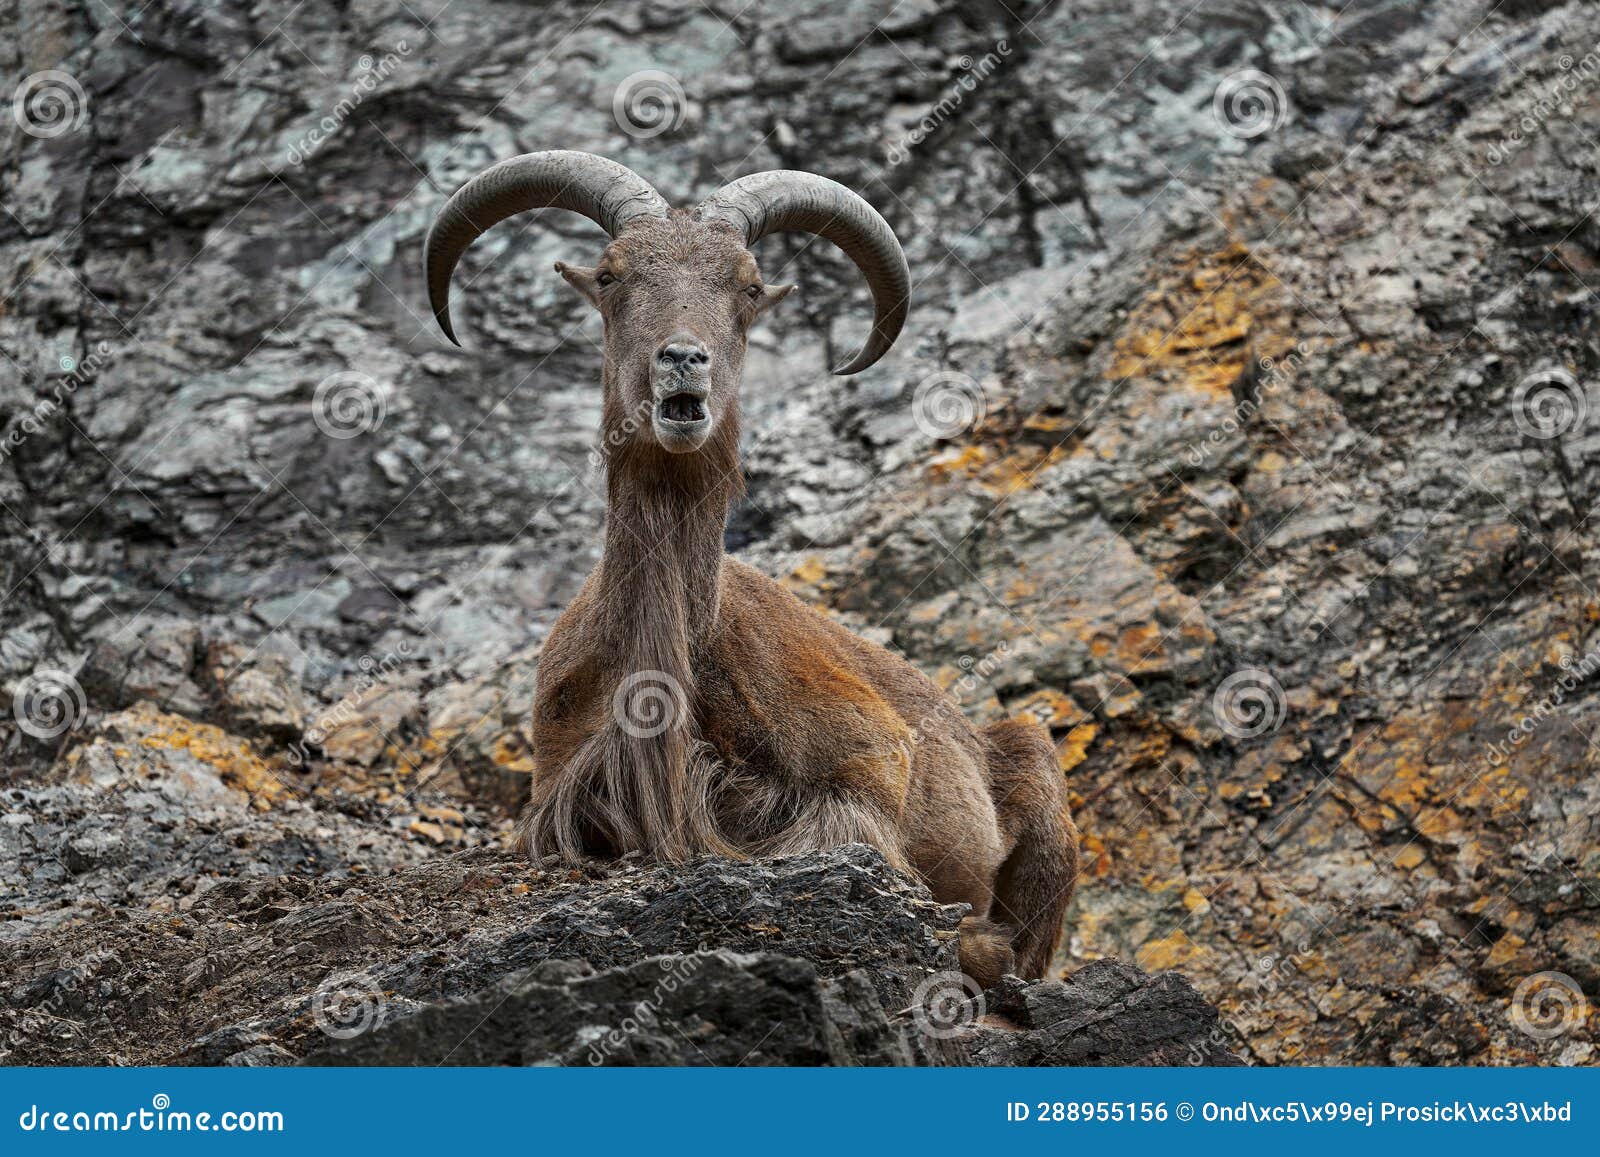 barbary sheep, ammotragus lervia, morroco, africa. animal in the nature rock habitat. wild sheep on the stone, horn animal in the